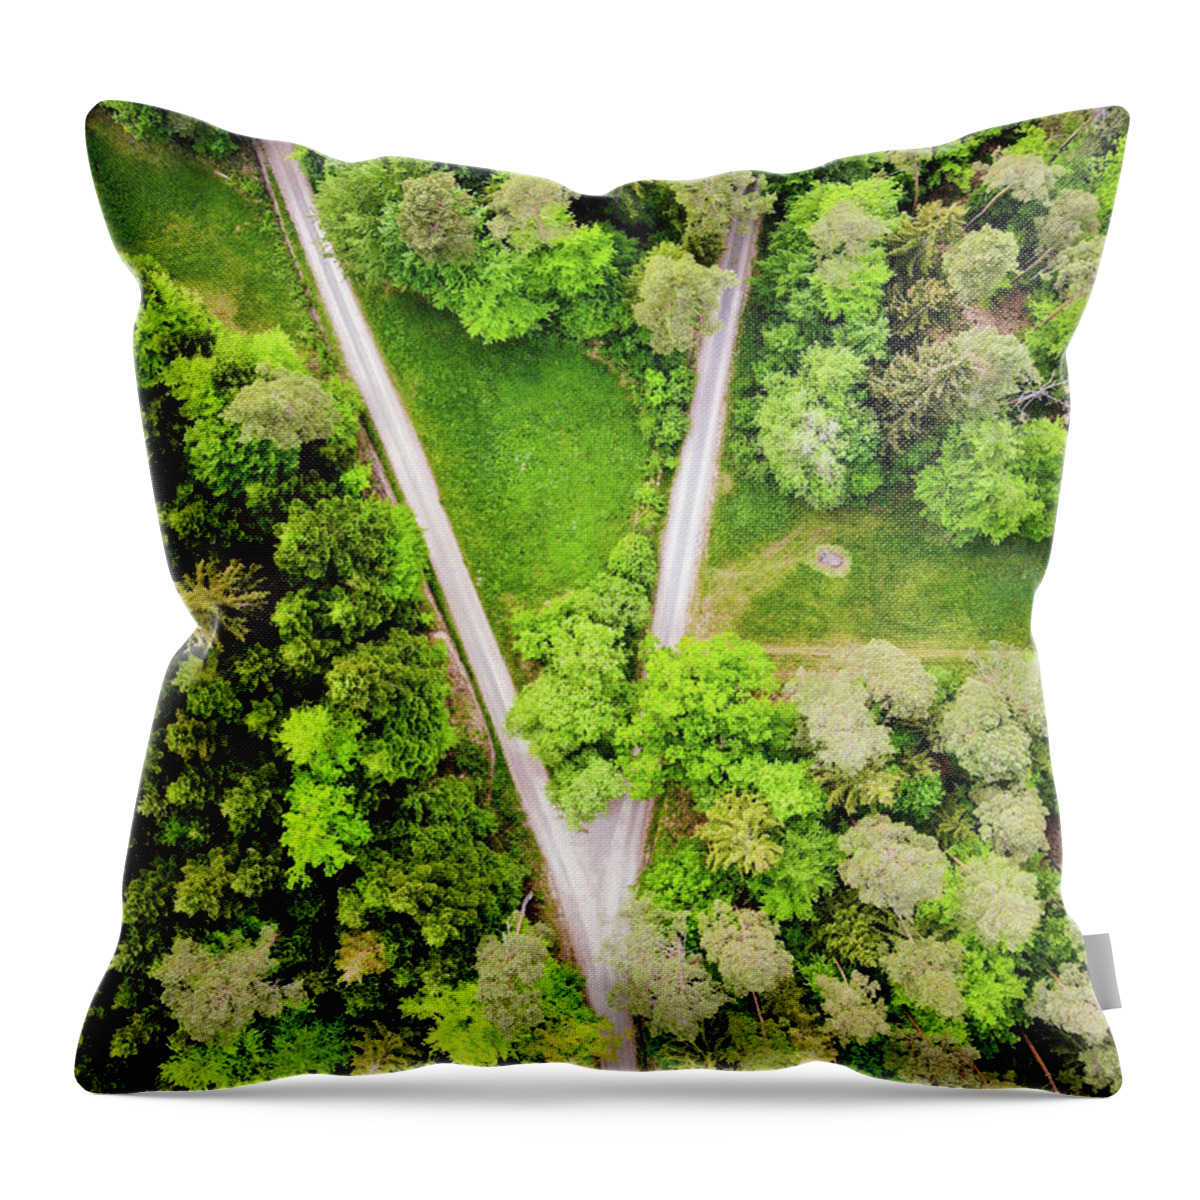 Forest Throw Pillow featuring the photograph Geometric Landscape 02 Forest Path by Matthias Hauser